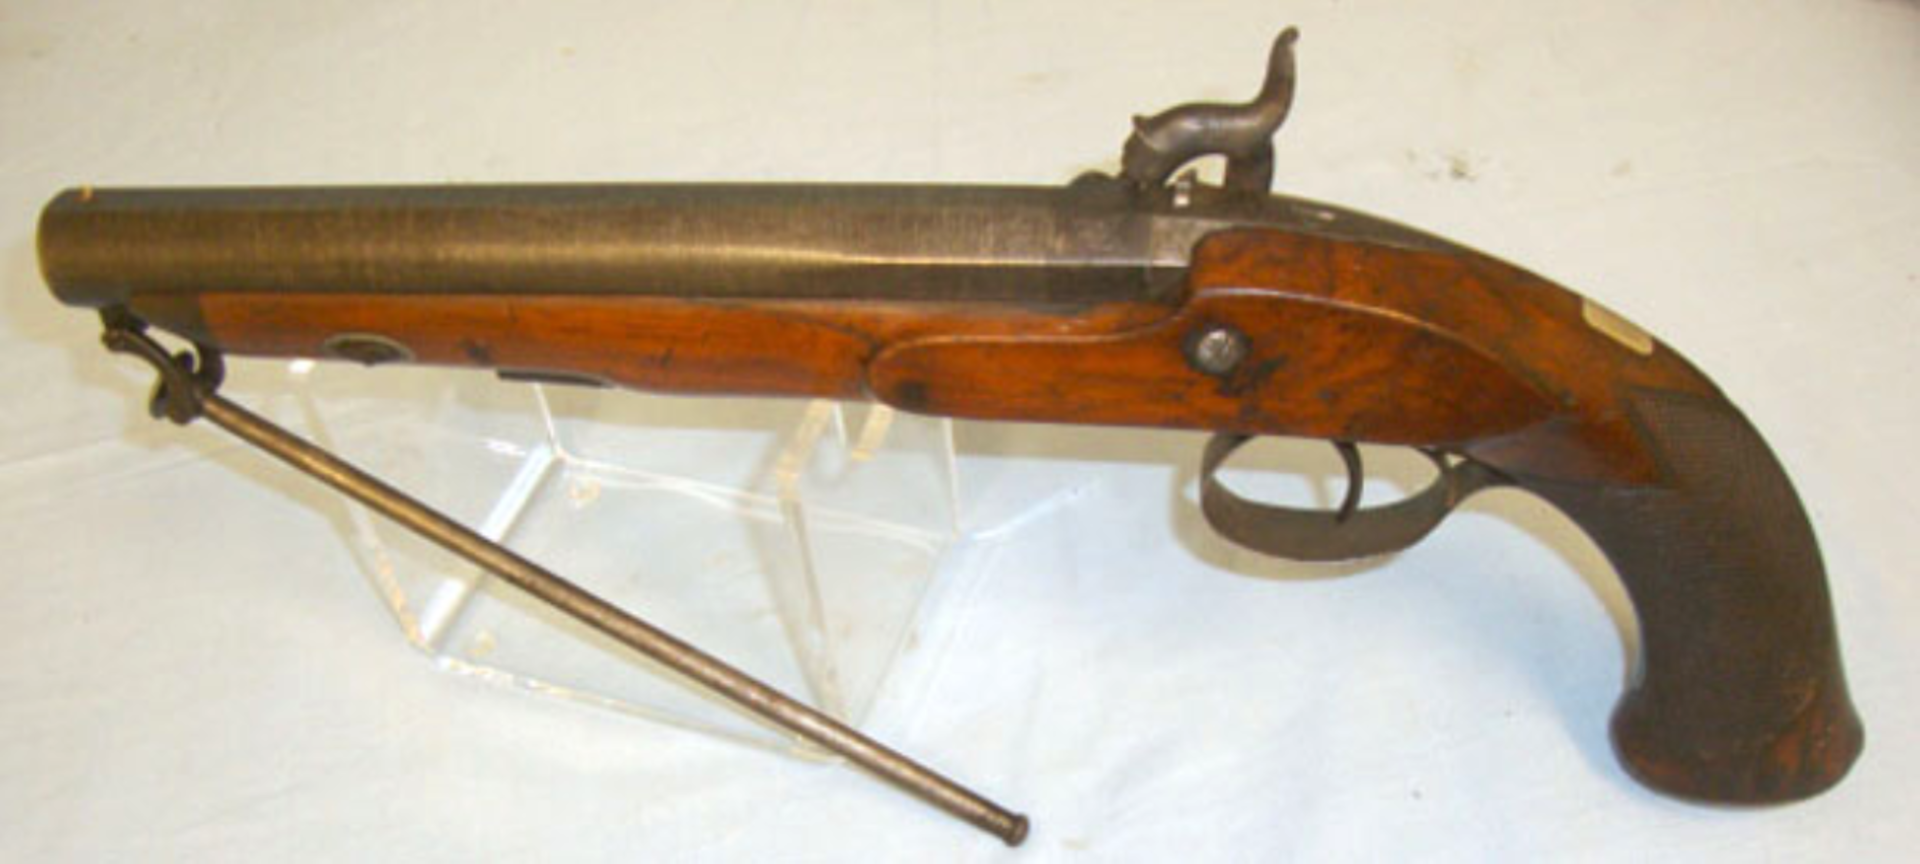 1821-1868 English .700 Bore Percussion Duelling / Holster Pistol By Andrews Pall Mall London. - Bild 2 aus 3